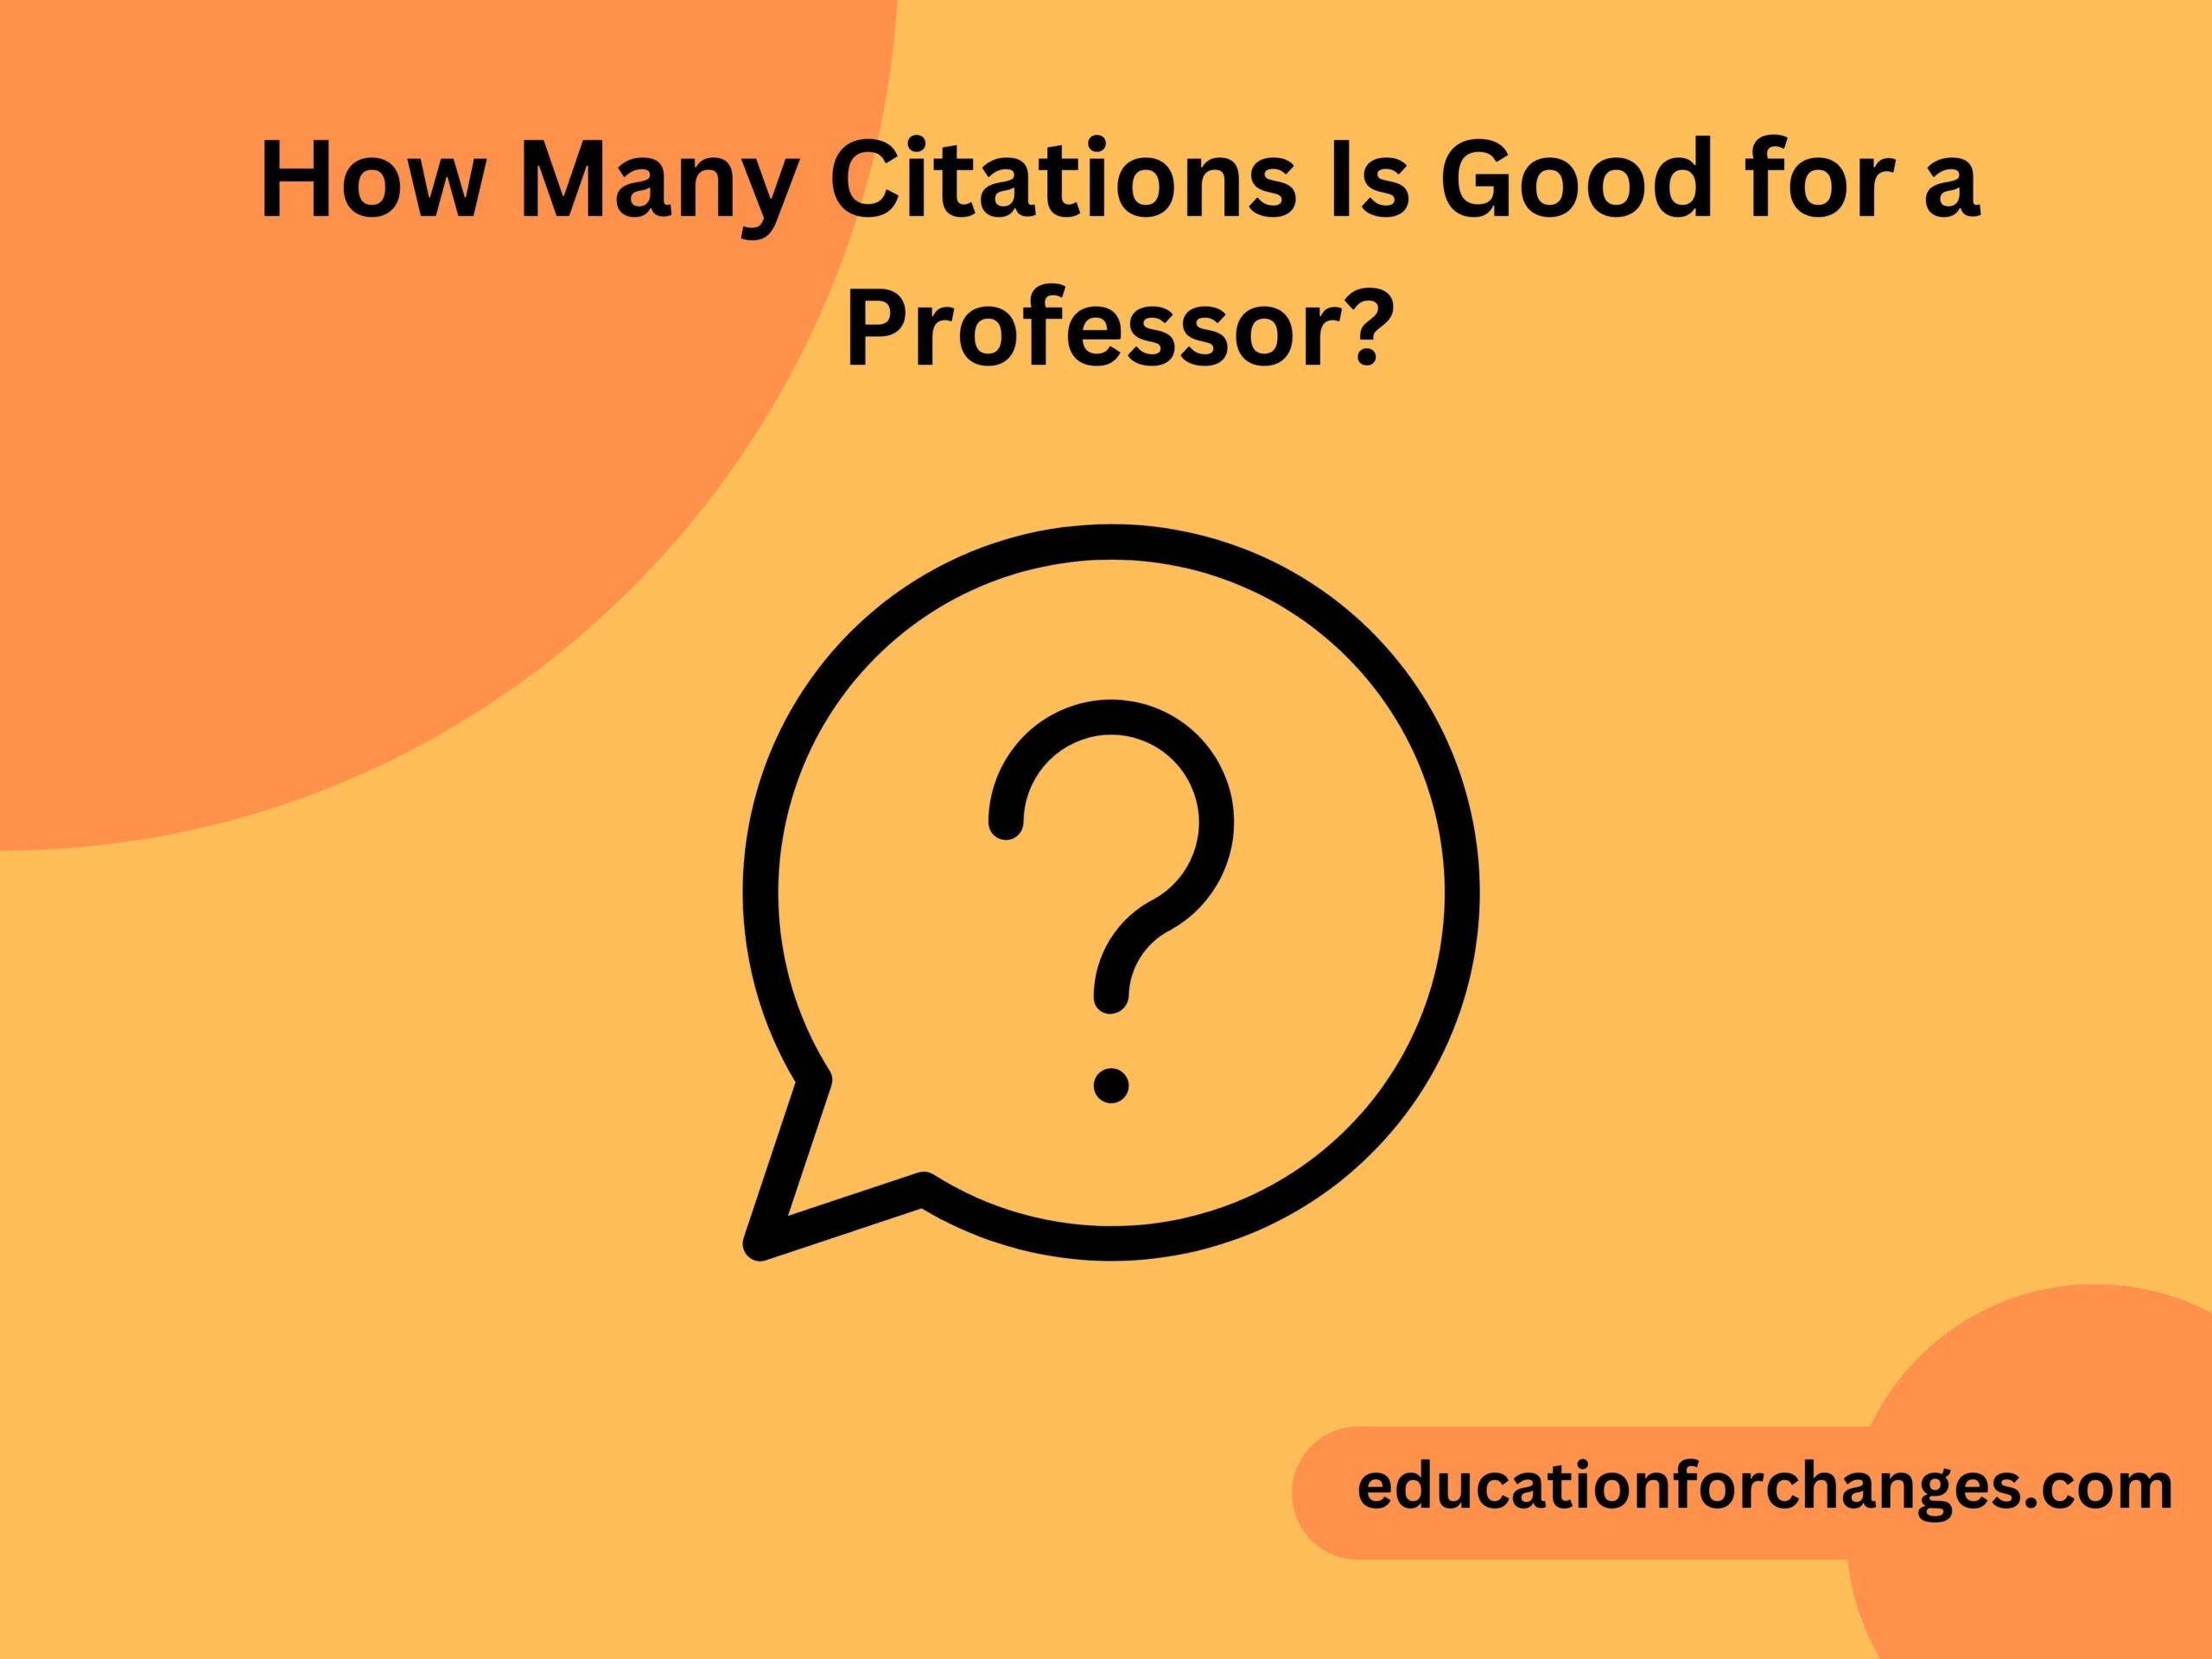 How Many Citations Is Good for a Professor?